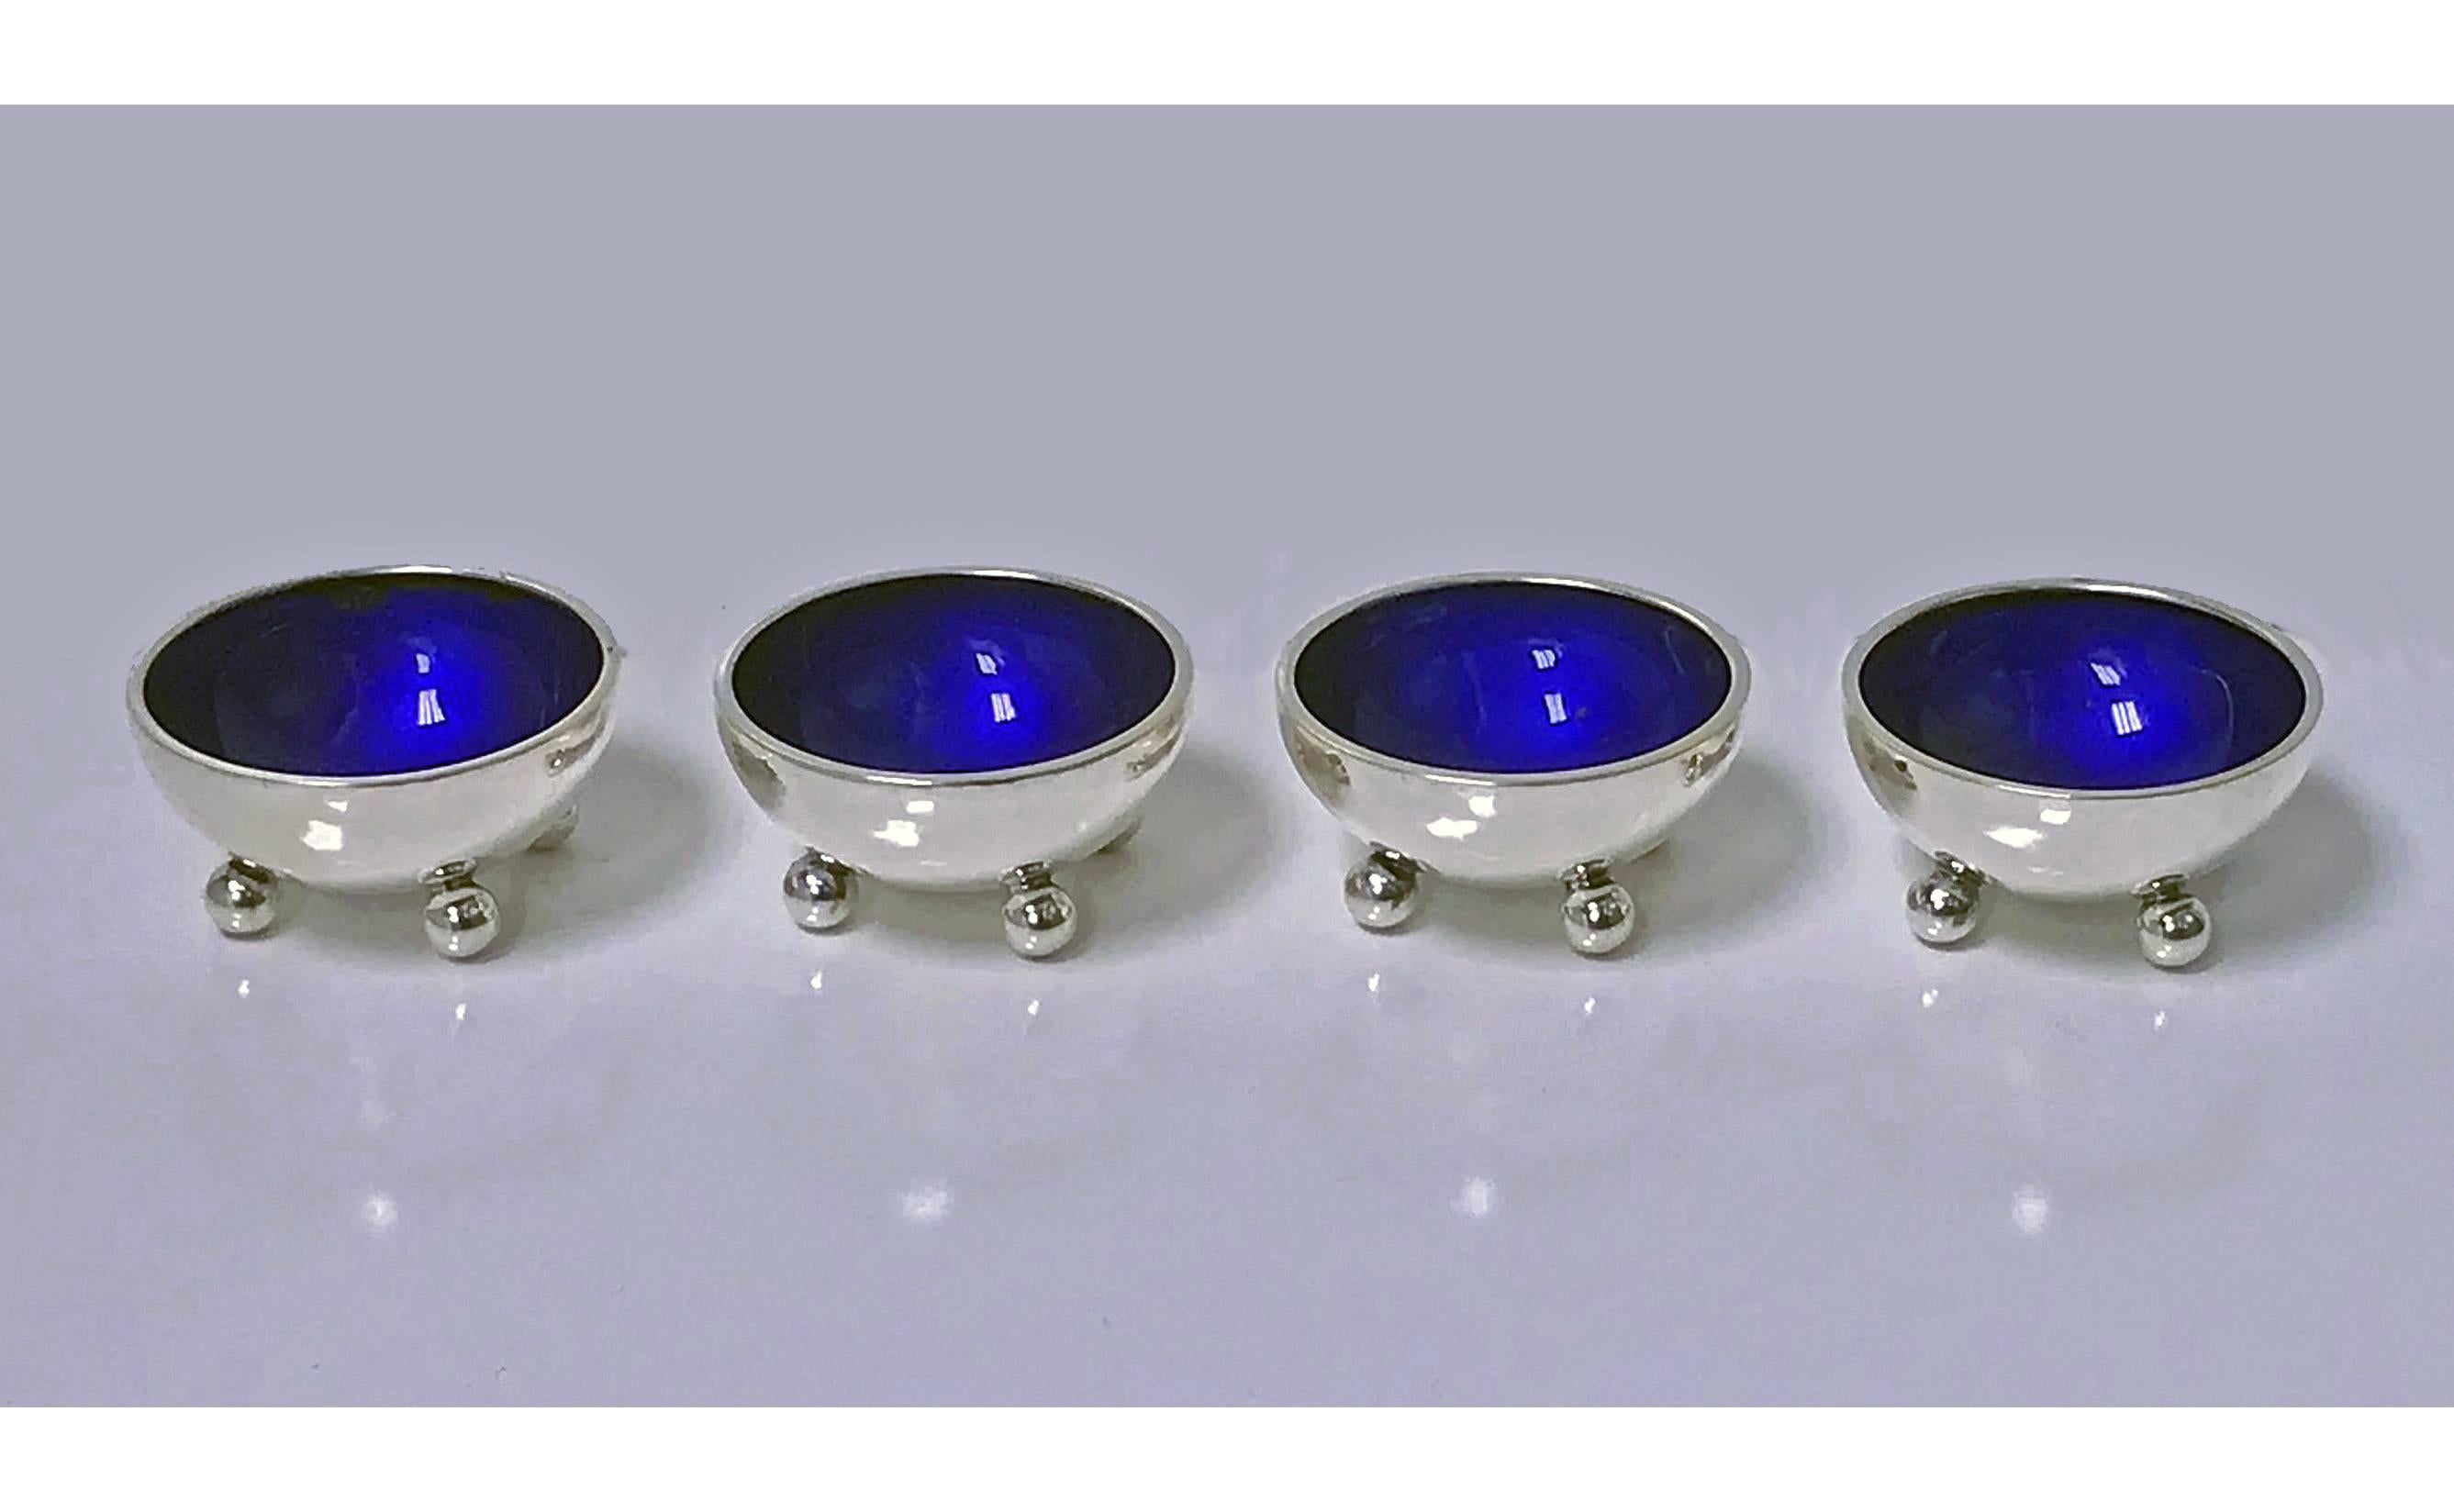 Four Georg Jensen sterling silver salts with cobalt enamel interiors, circa 1960, designed by Harald Neilsen, circa 1930. Design Number 433. Measures: diameter 1.50 inches, height 0.75 inches. Total item weight: 85.22 grams.